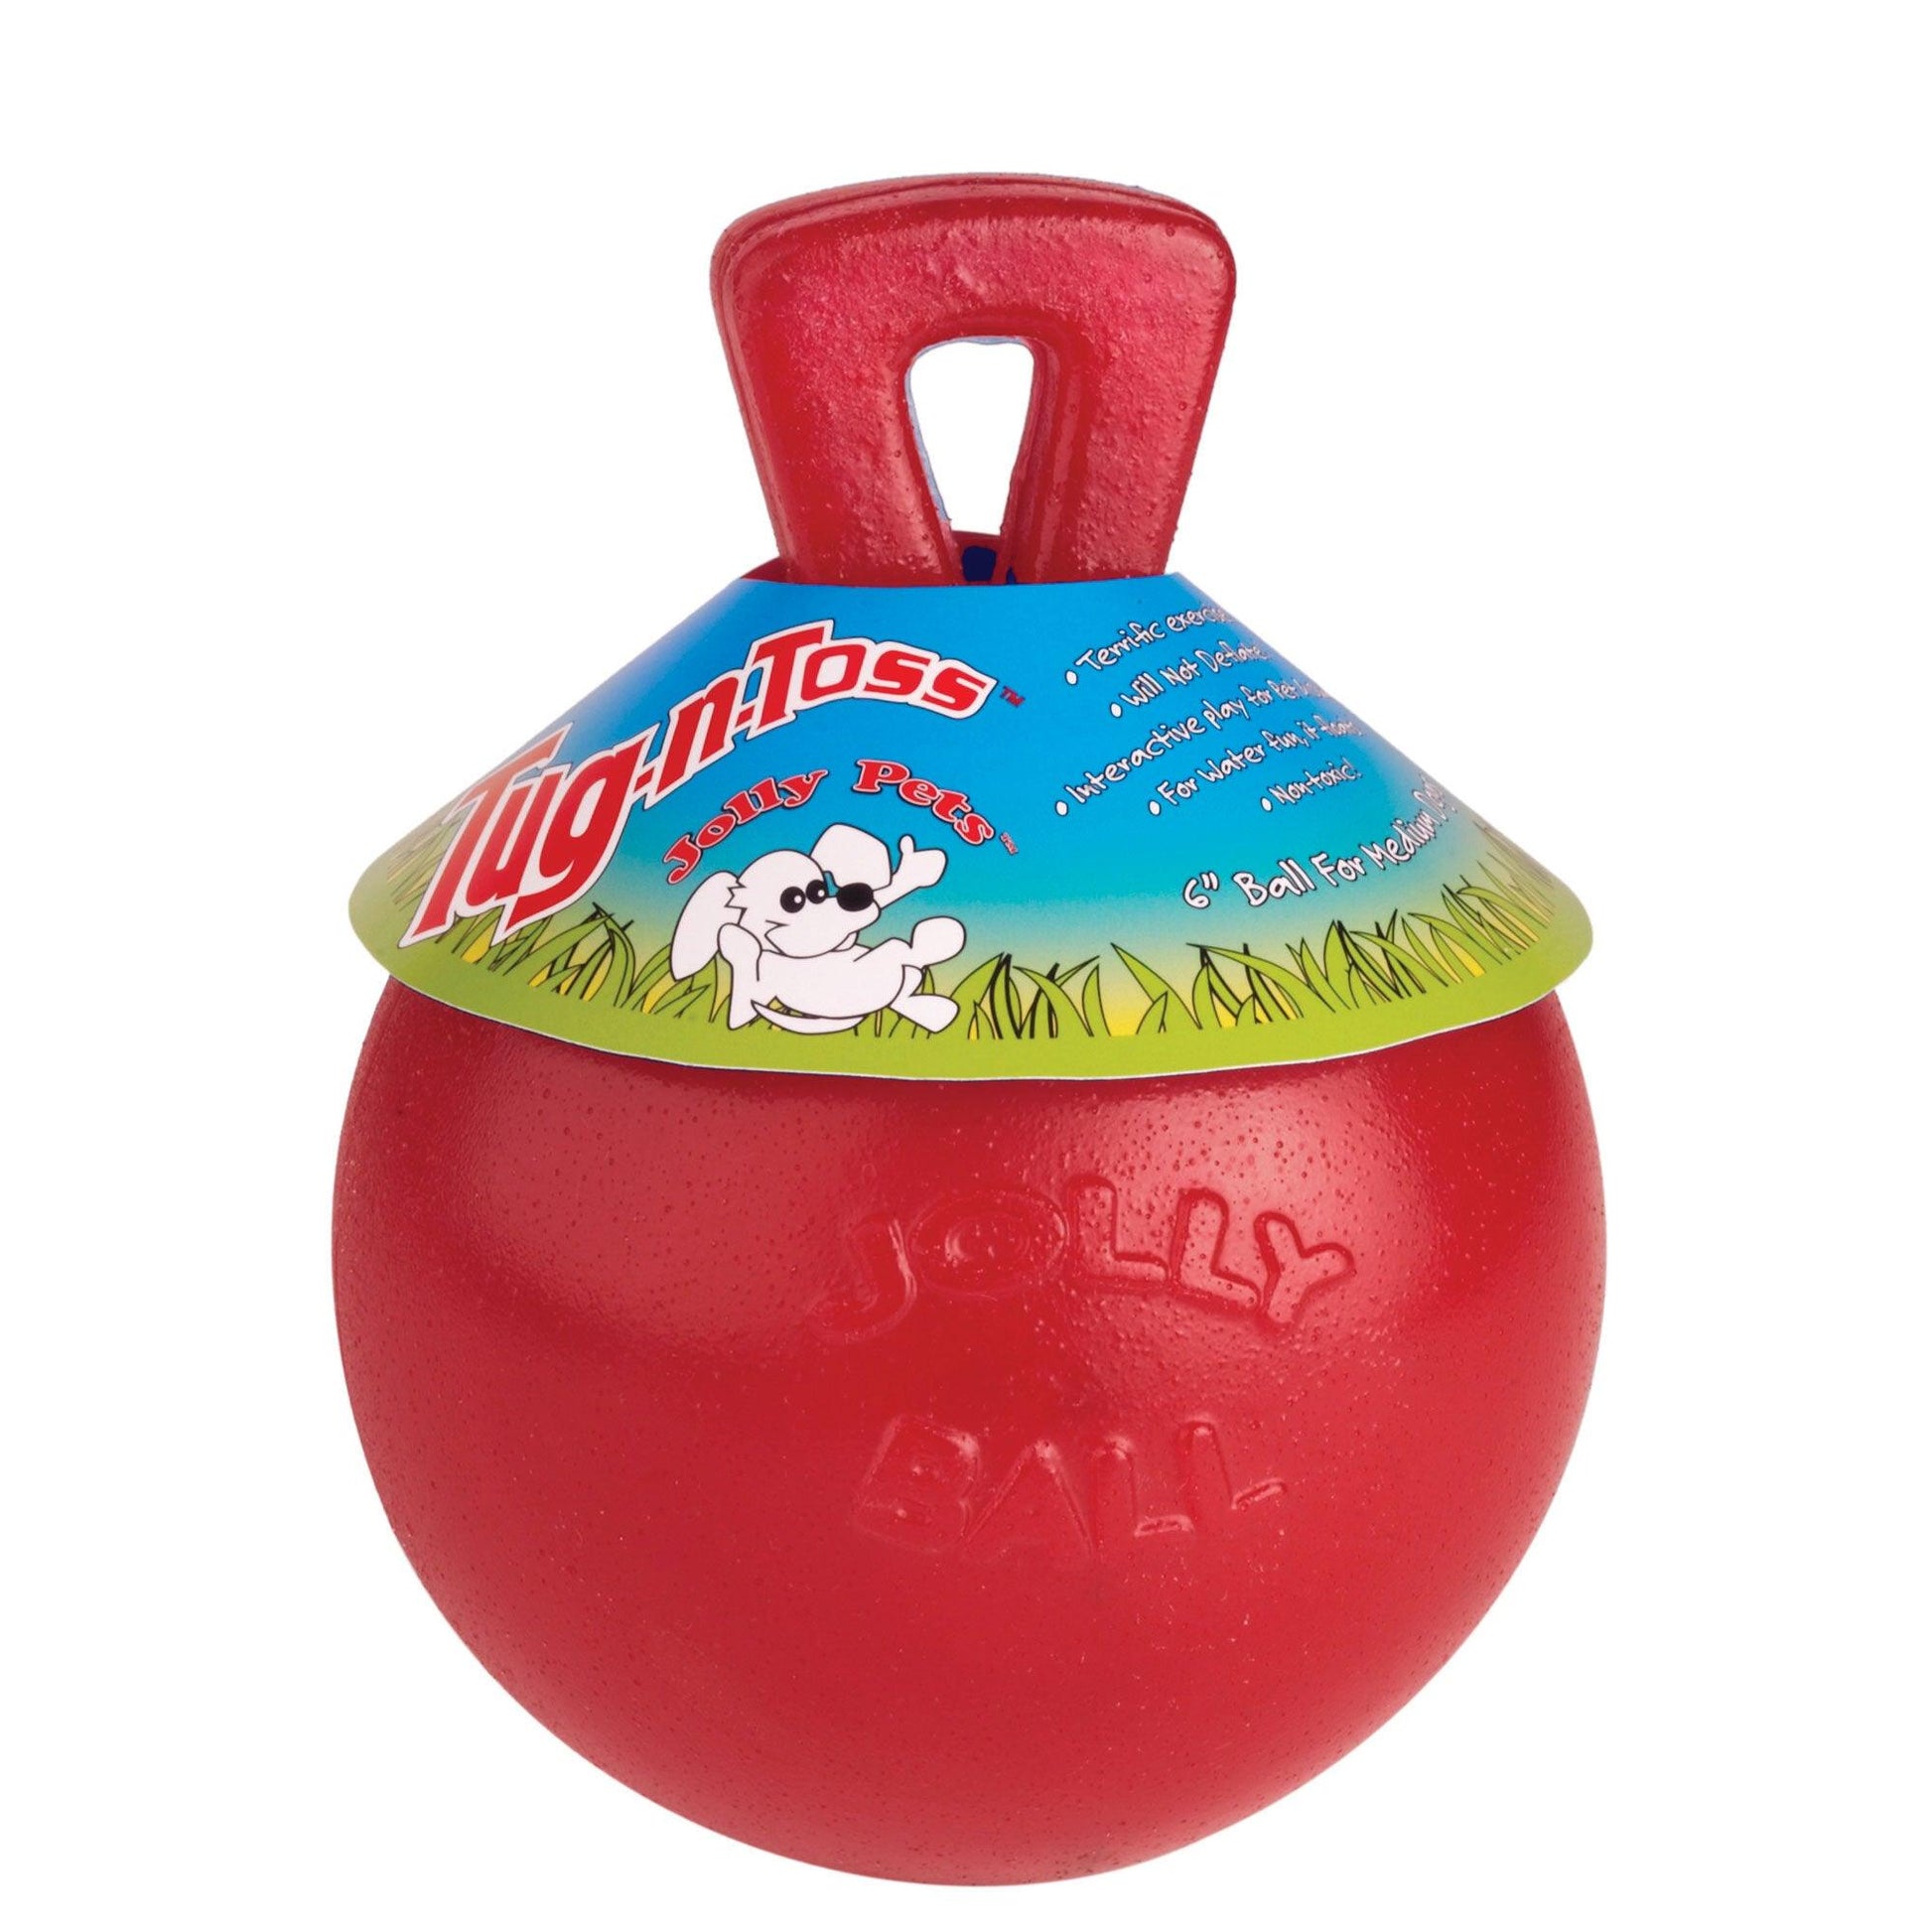 Rosewood Jolly Ball Tug-N-Toss Red 20cm - North East Pet Shop Rosewood